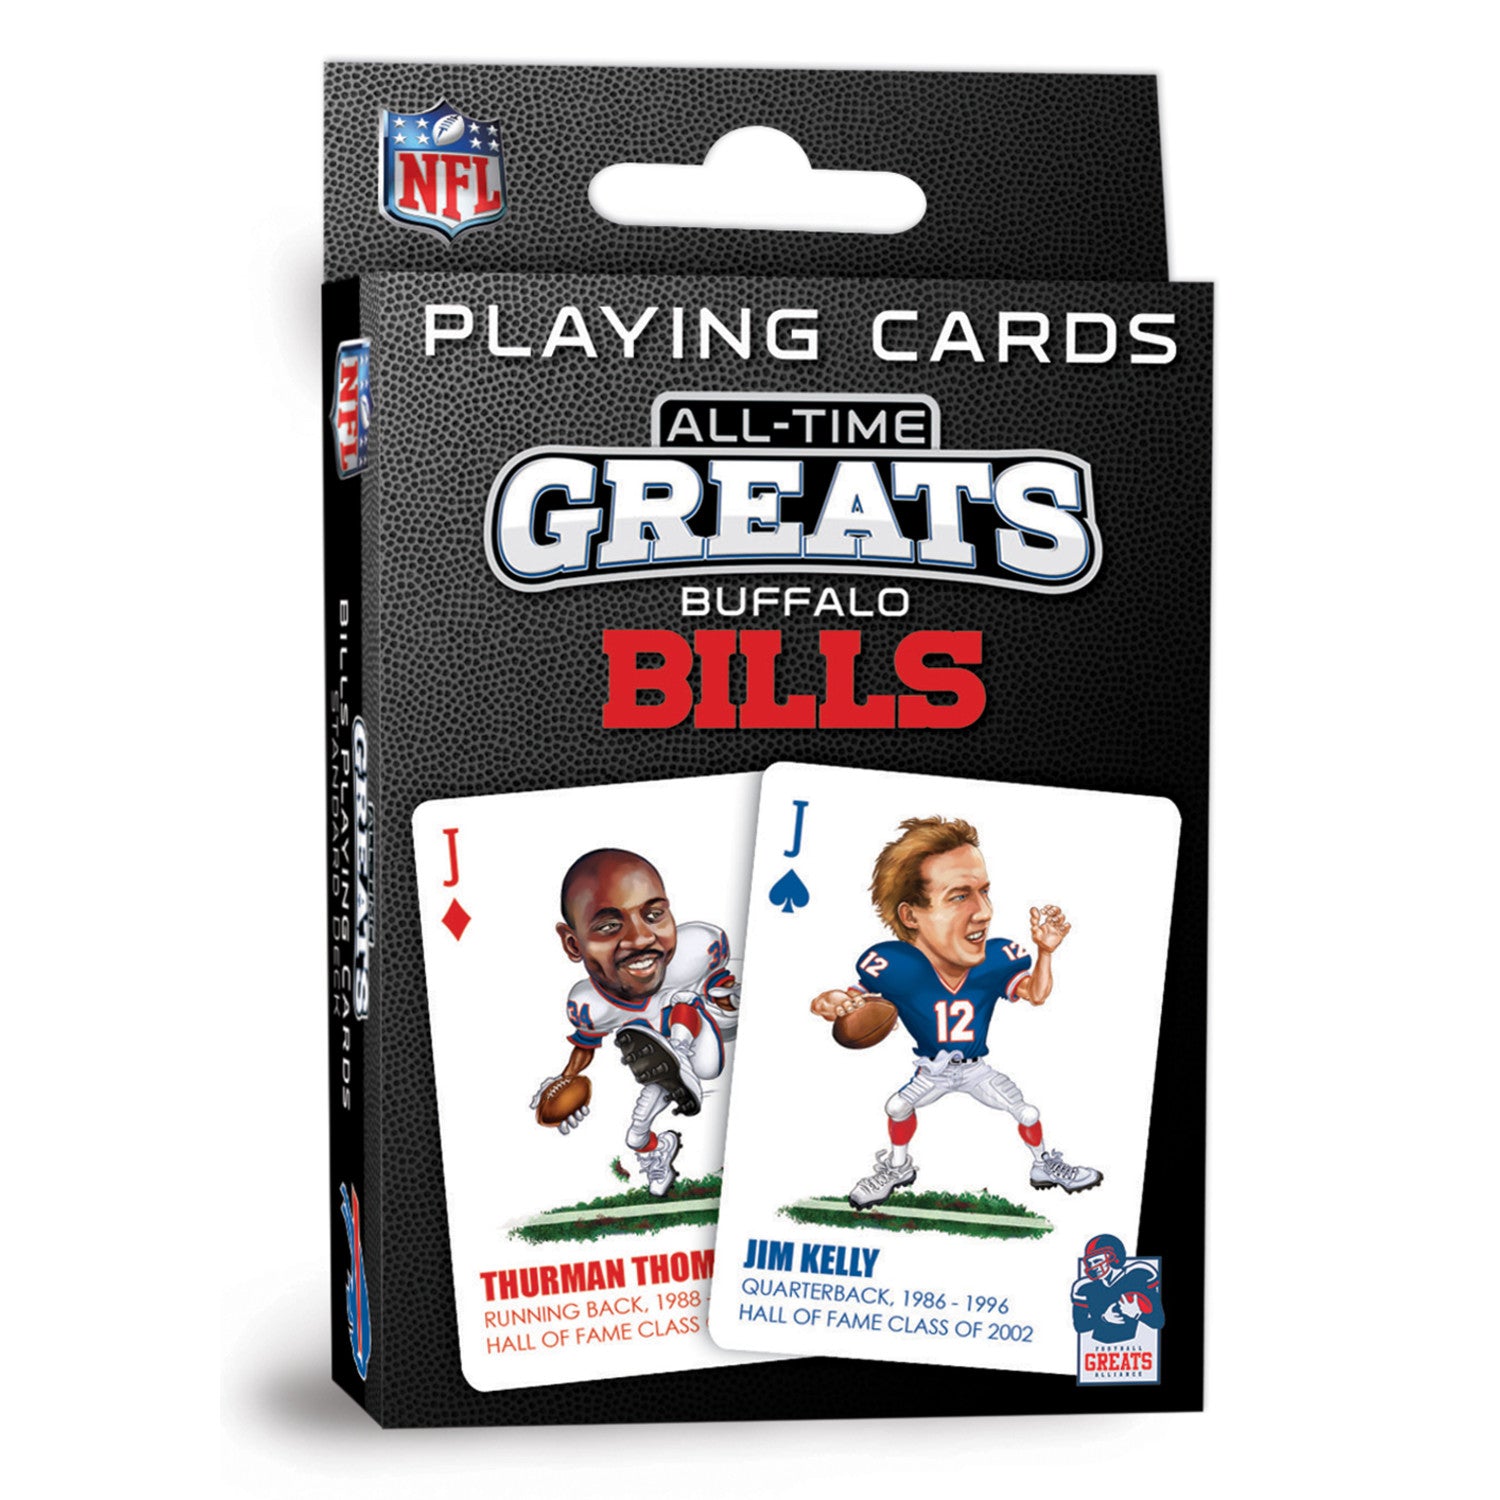 Buffalo Bills All-Time Greats Playing Cards - 54 Card Deck